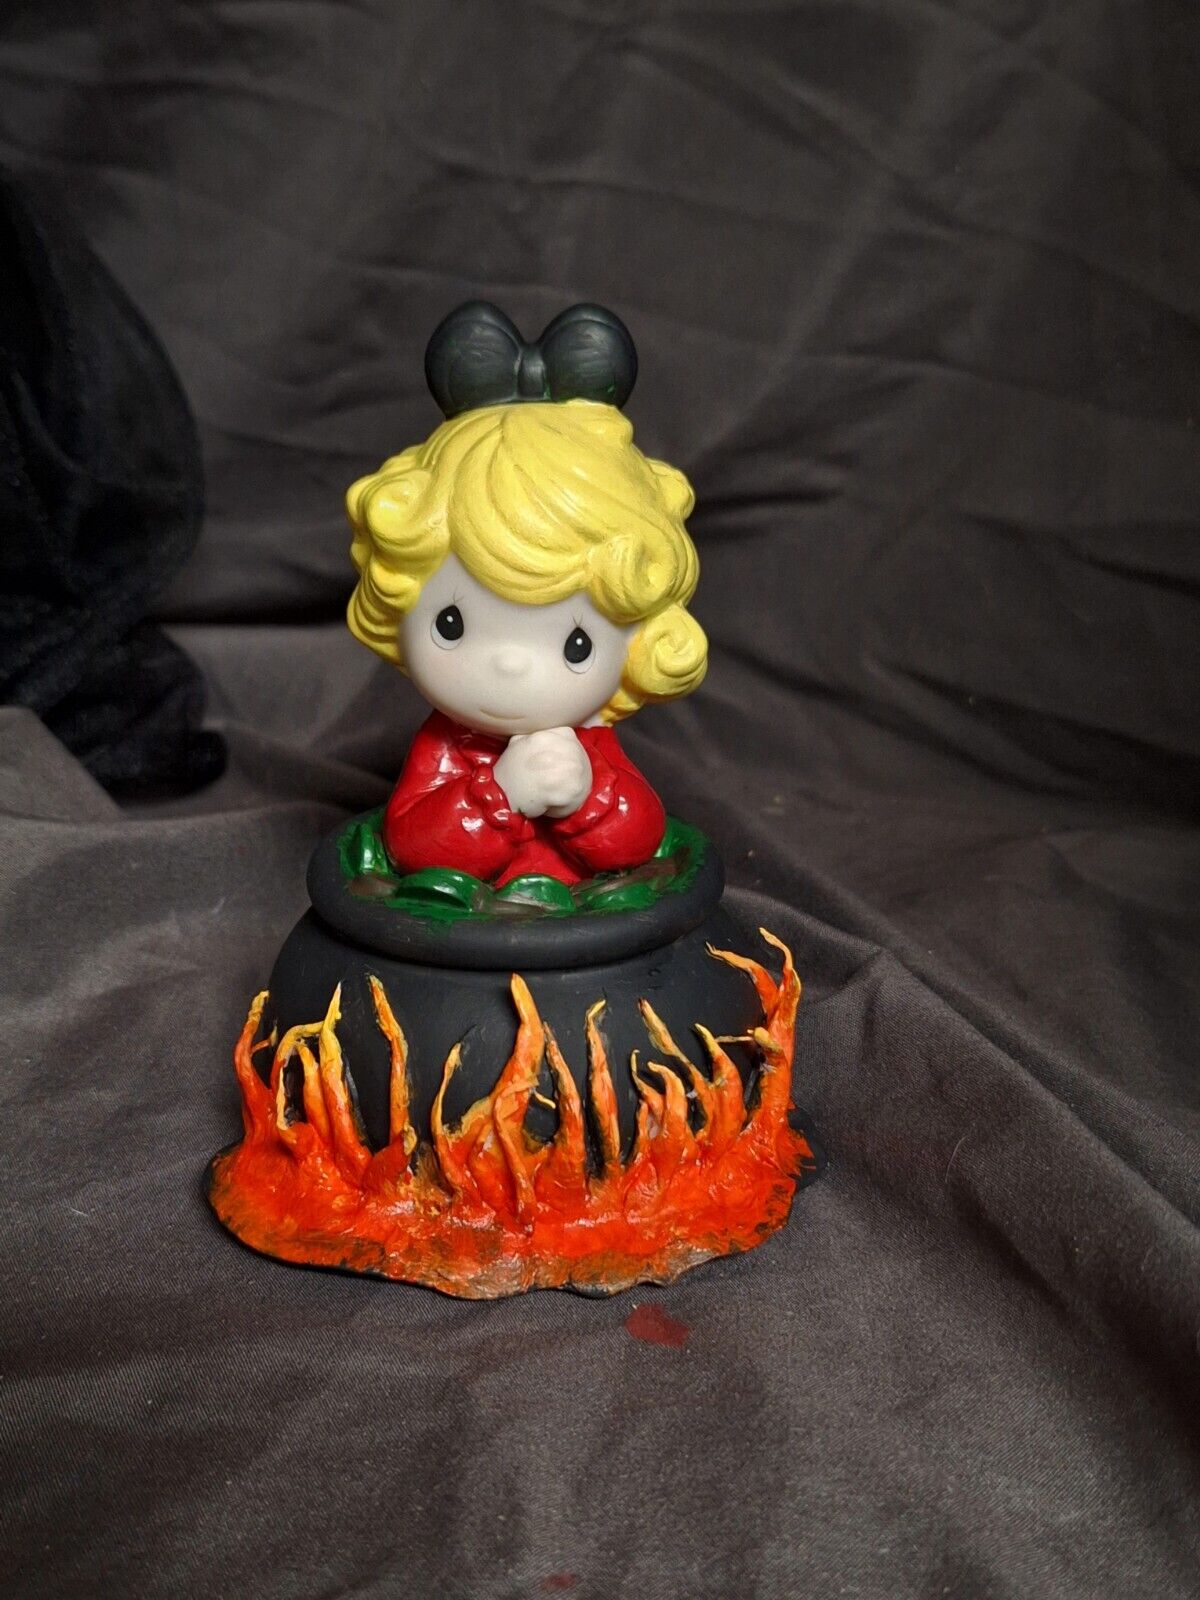 altered precious moments figurine Girl In Fire Handpainted Med Size